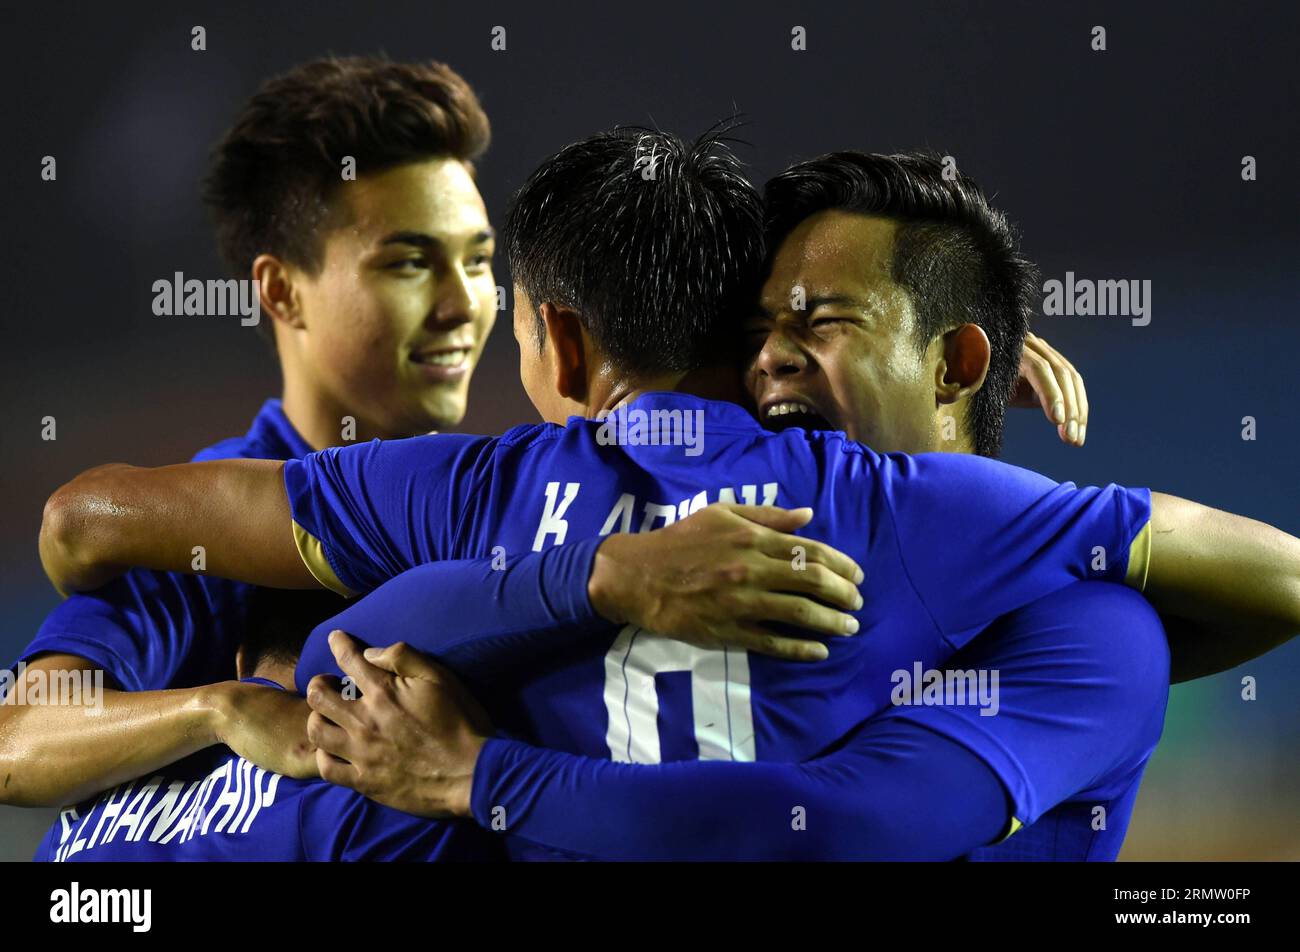 (140925) -- INCHEON, Sept. 25, 2014 -- Players of Thailand celebrate goal during men s football round of 16 match against China at the 17th Asian Games in Incheon, South Korea, Sept. 25, 2014. China lost 0-2. )(mcg) (SP)SOUTH KOREA-INCHEON-17TH ASIAN GAMES-FOOTBALL LoxPingxFai PUBLICATIONxNOTxINxCHN   Incheon Sept 25 2014 Players of Thai country Celebrate GOAL during Men S Football Round of 16 Match against China AT The 17th Asian Games in Incheon South Korea Sept 25 2014 China Lost 0 2 McG SP South Korea Incheon 17th Asian Games Football  PUBLICATIONxNOTxINxCHN Stock Photo